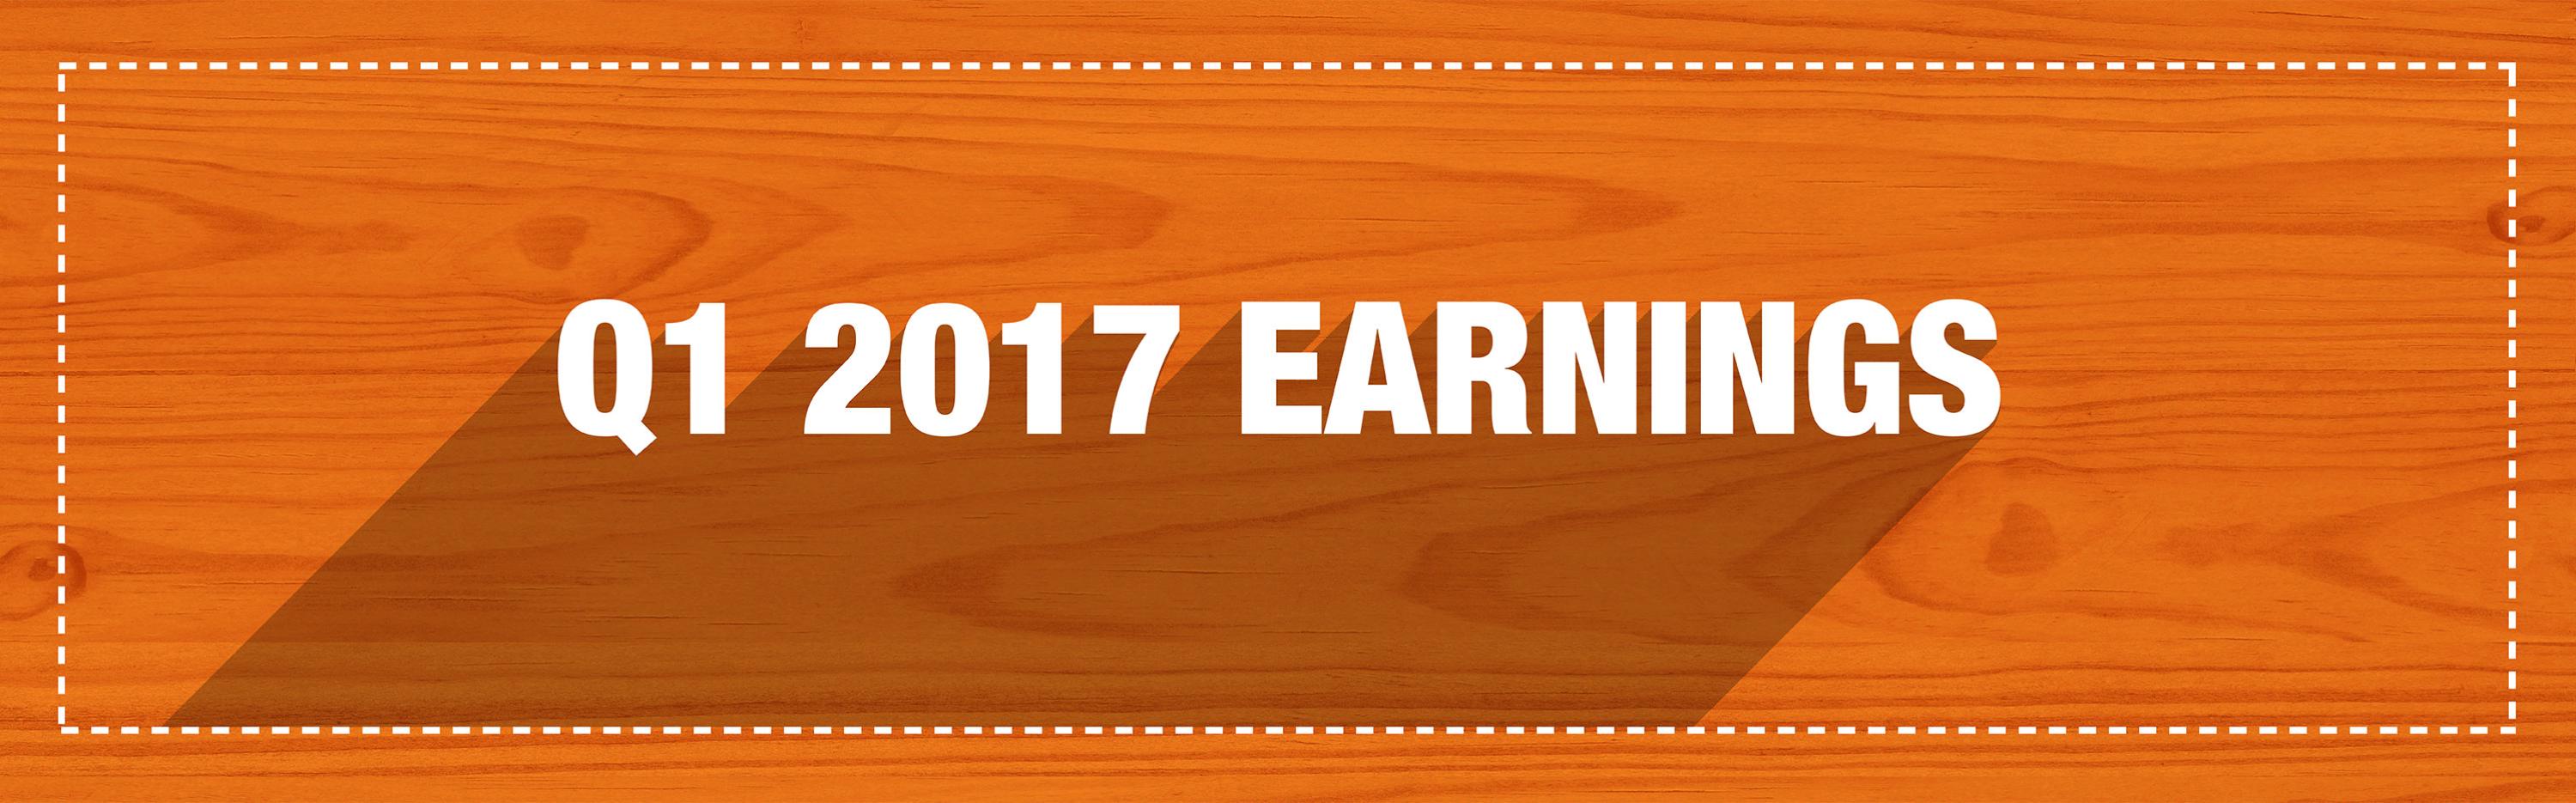 First Quarter 2017 Earnings Results